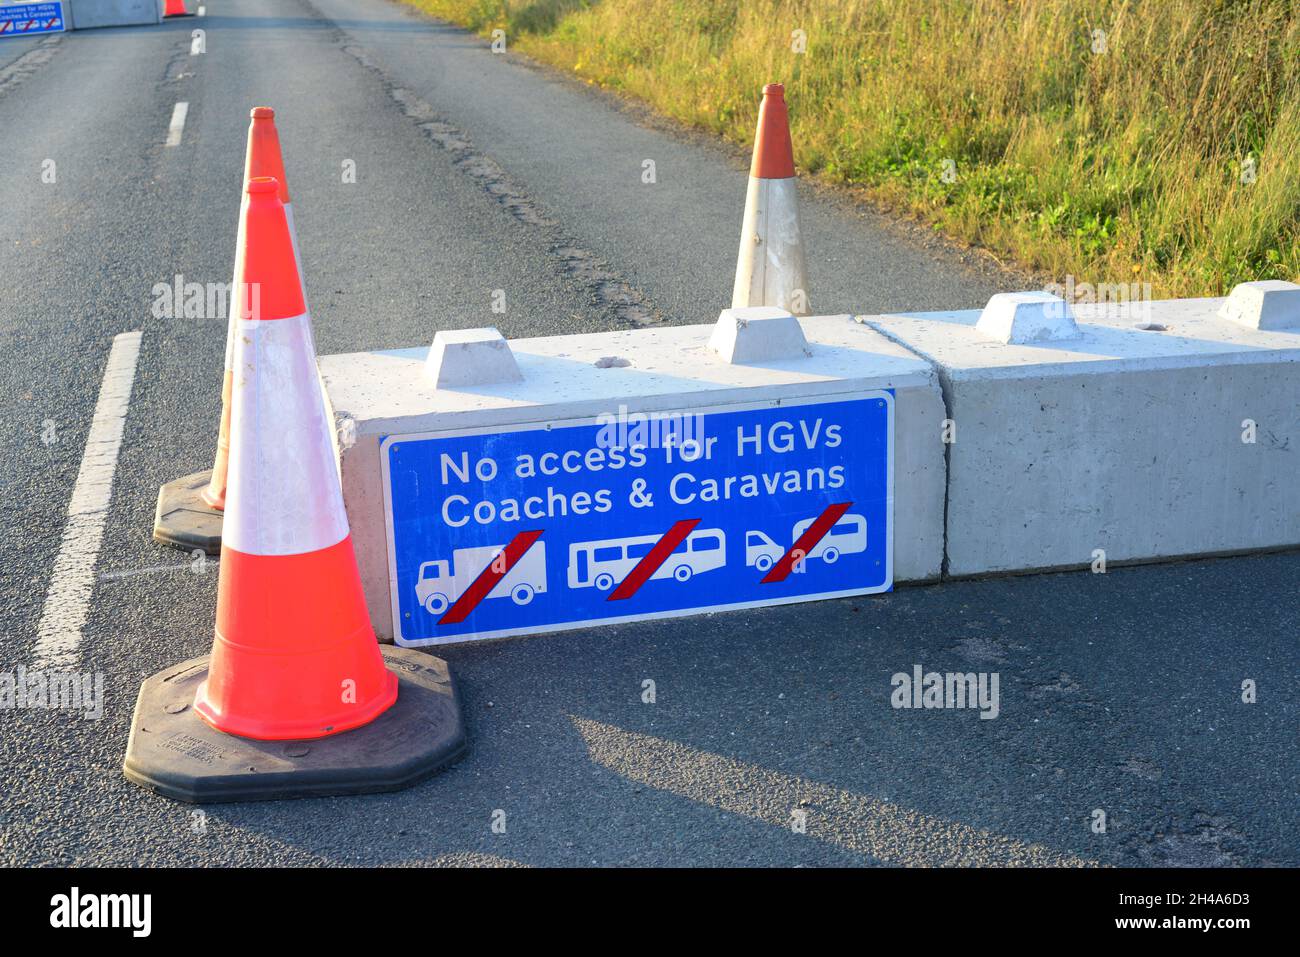 no access for hgv's, coaches and caravans on road ahead york united kingdom Stock Photo